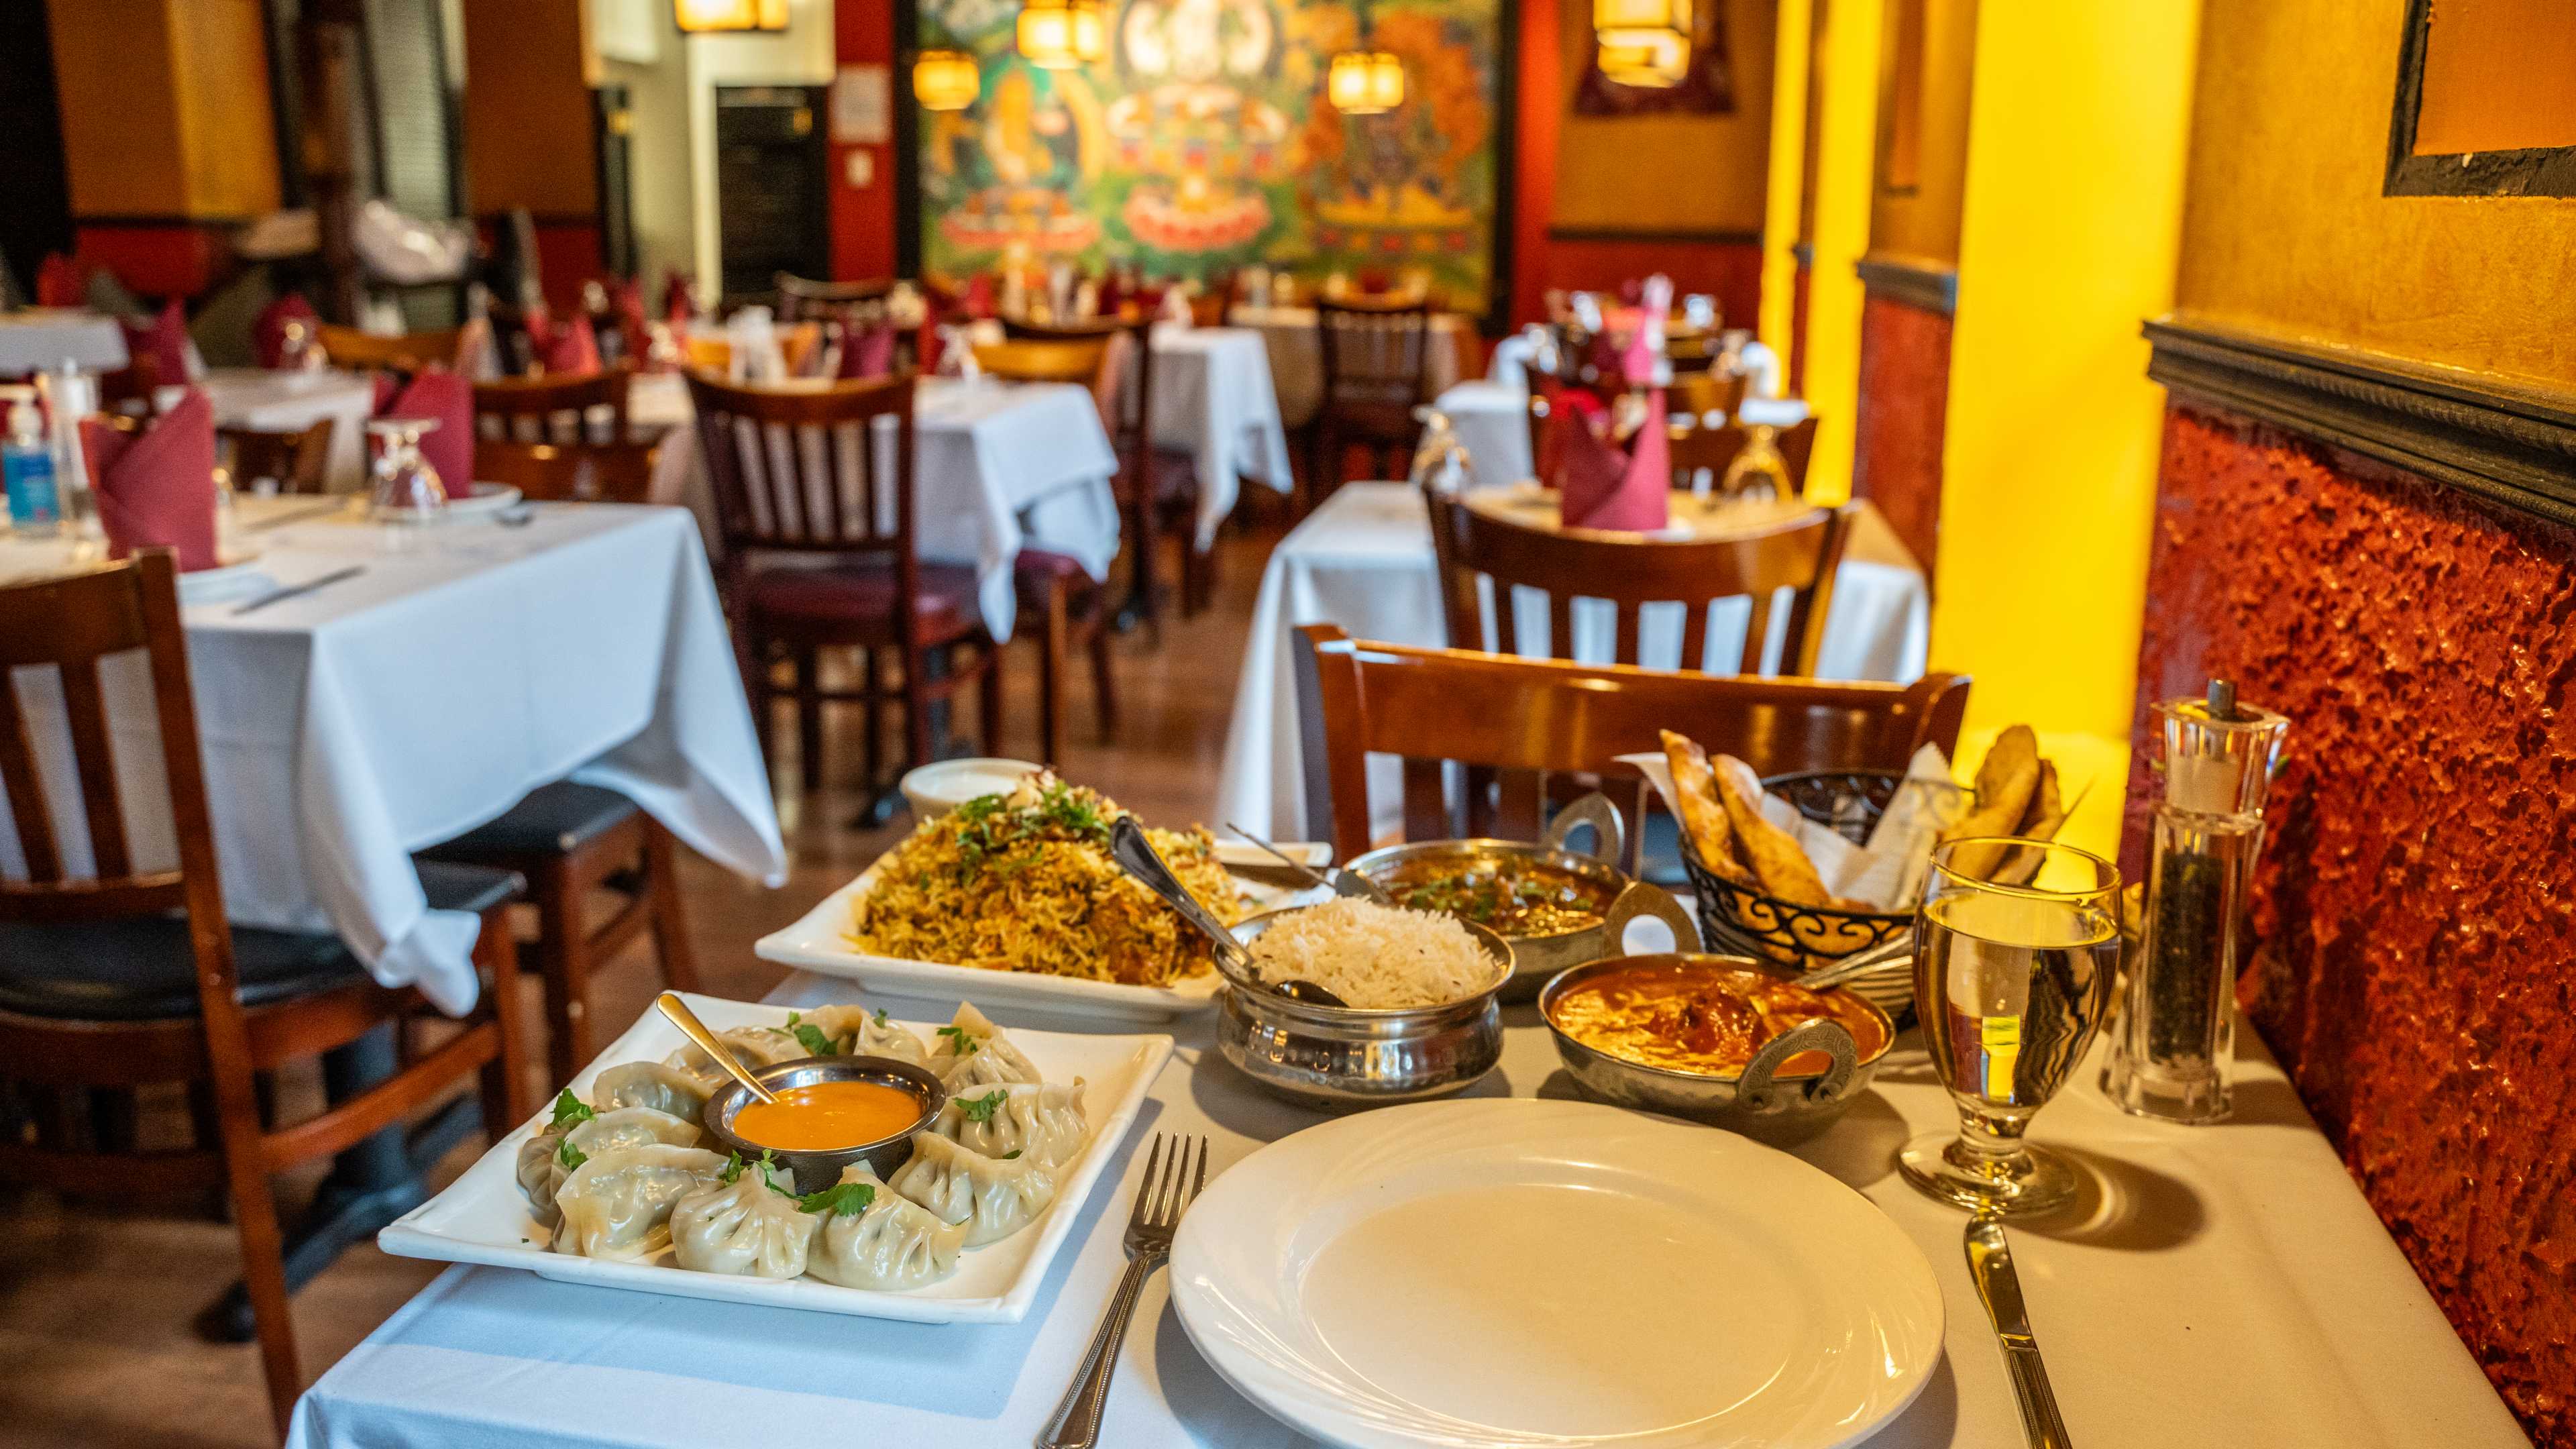 food spread of indian and nepali dishes in ornate dining room